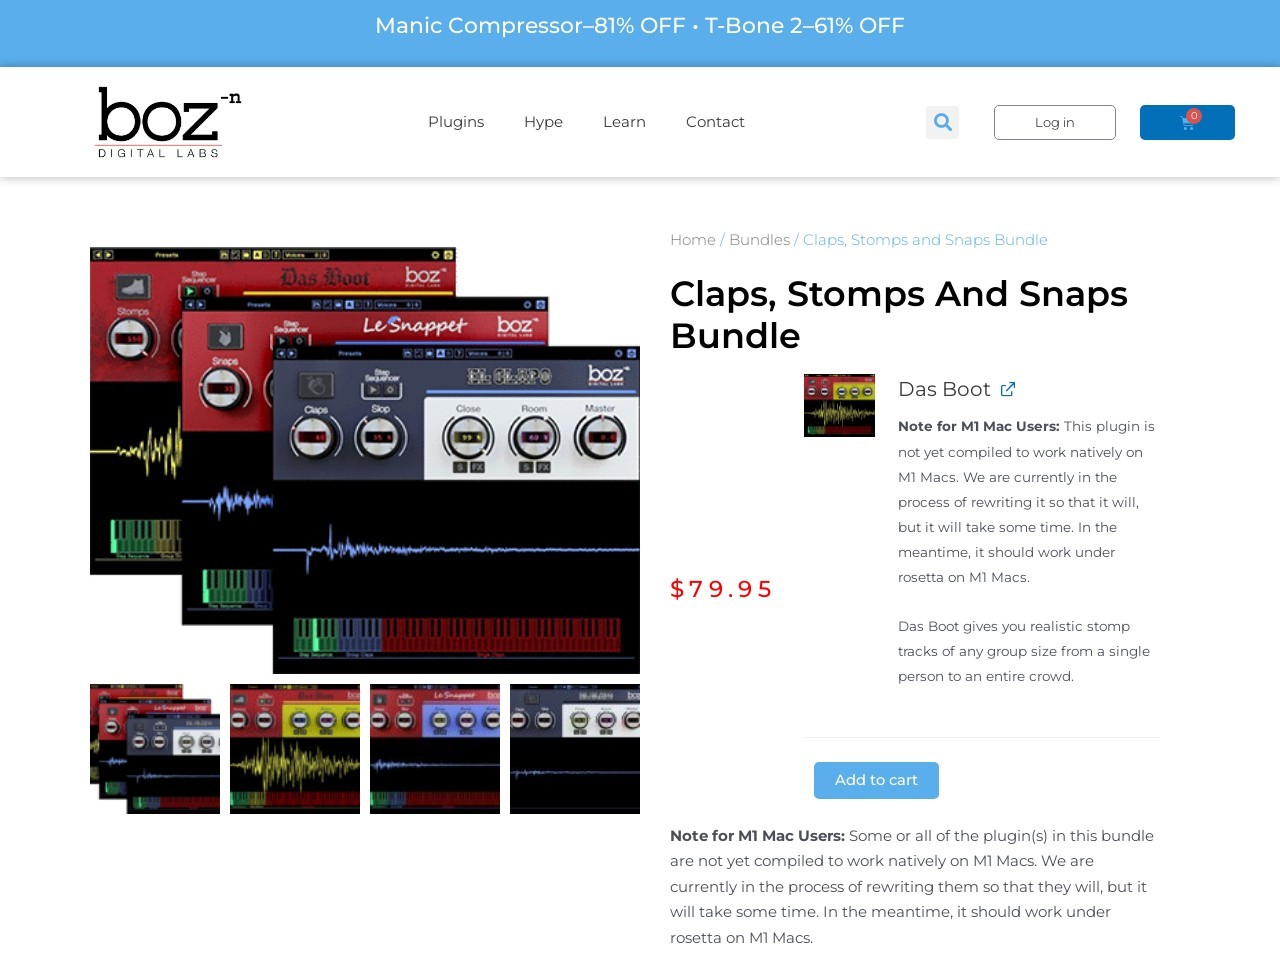 Claps, Stomps and Snaps Bundle - Boz Digital Labs